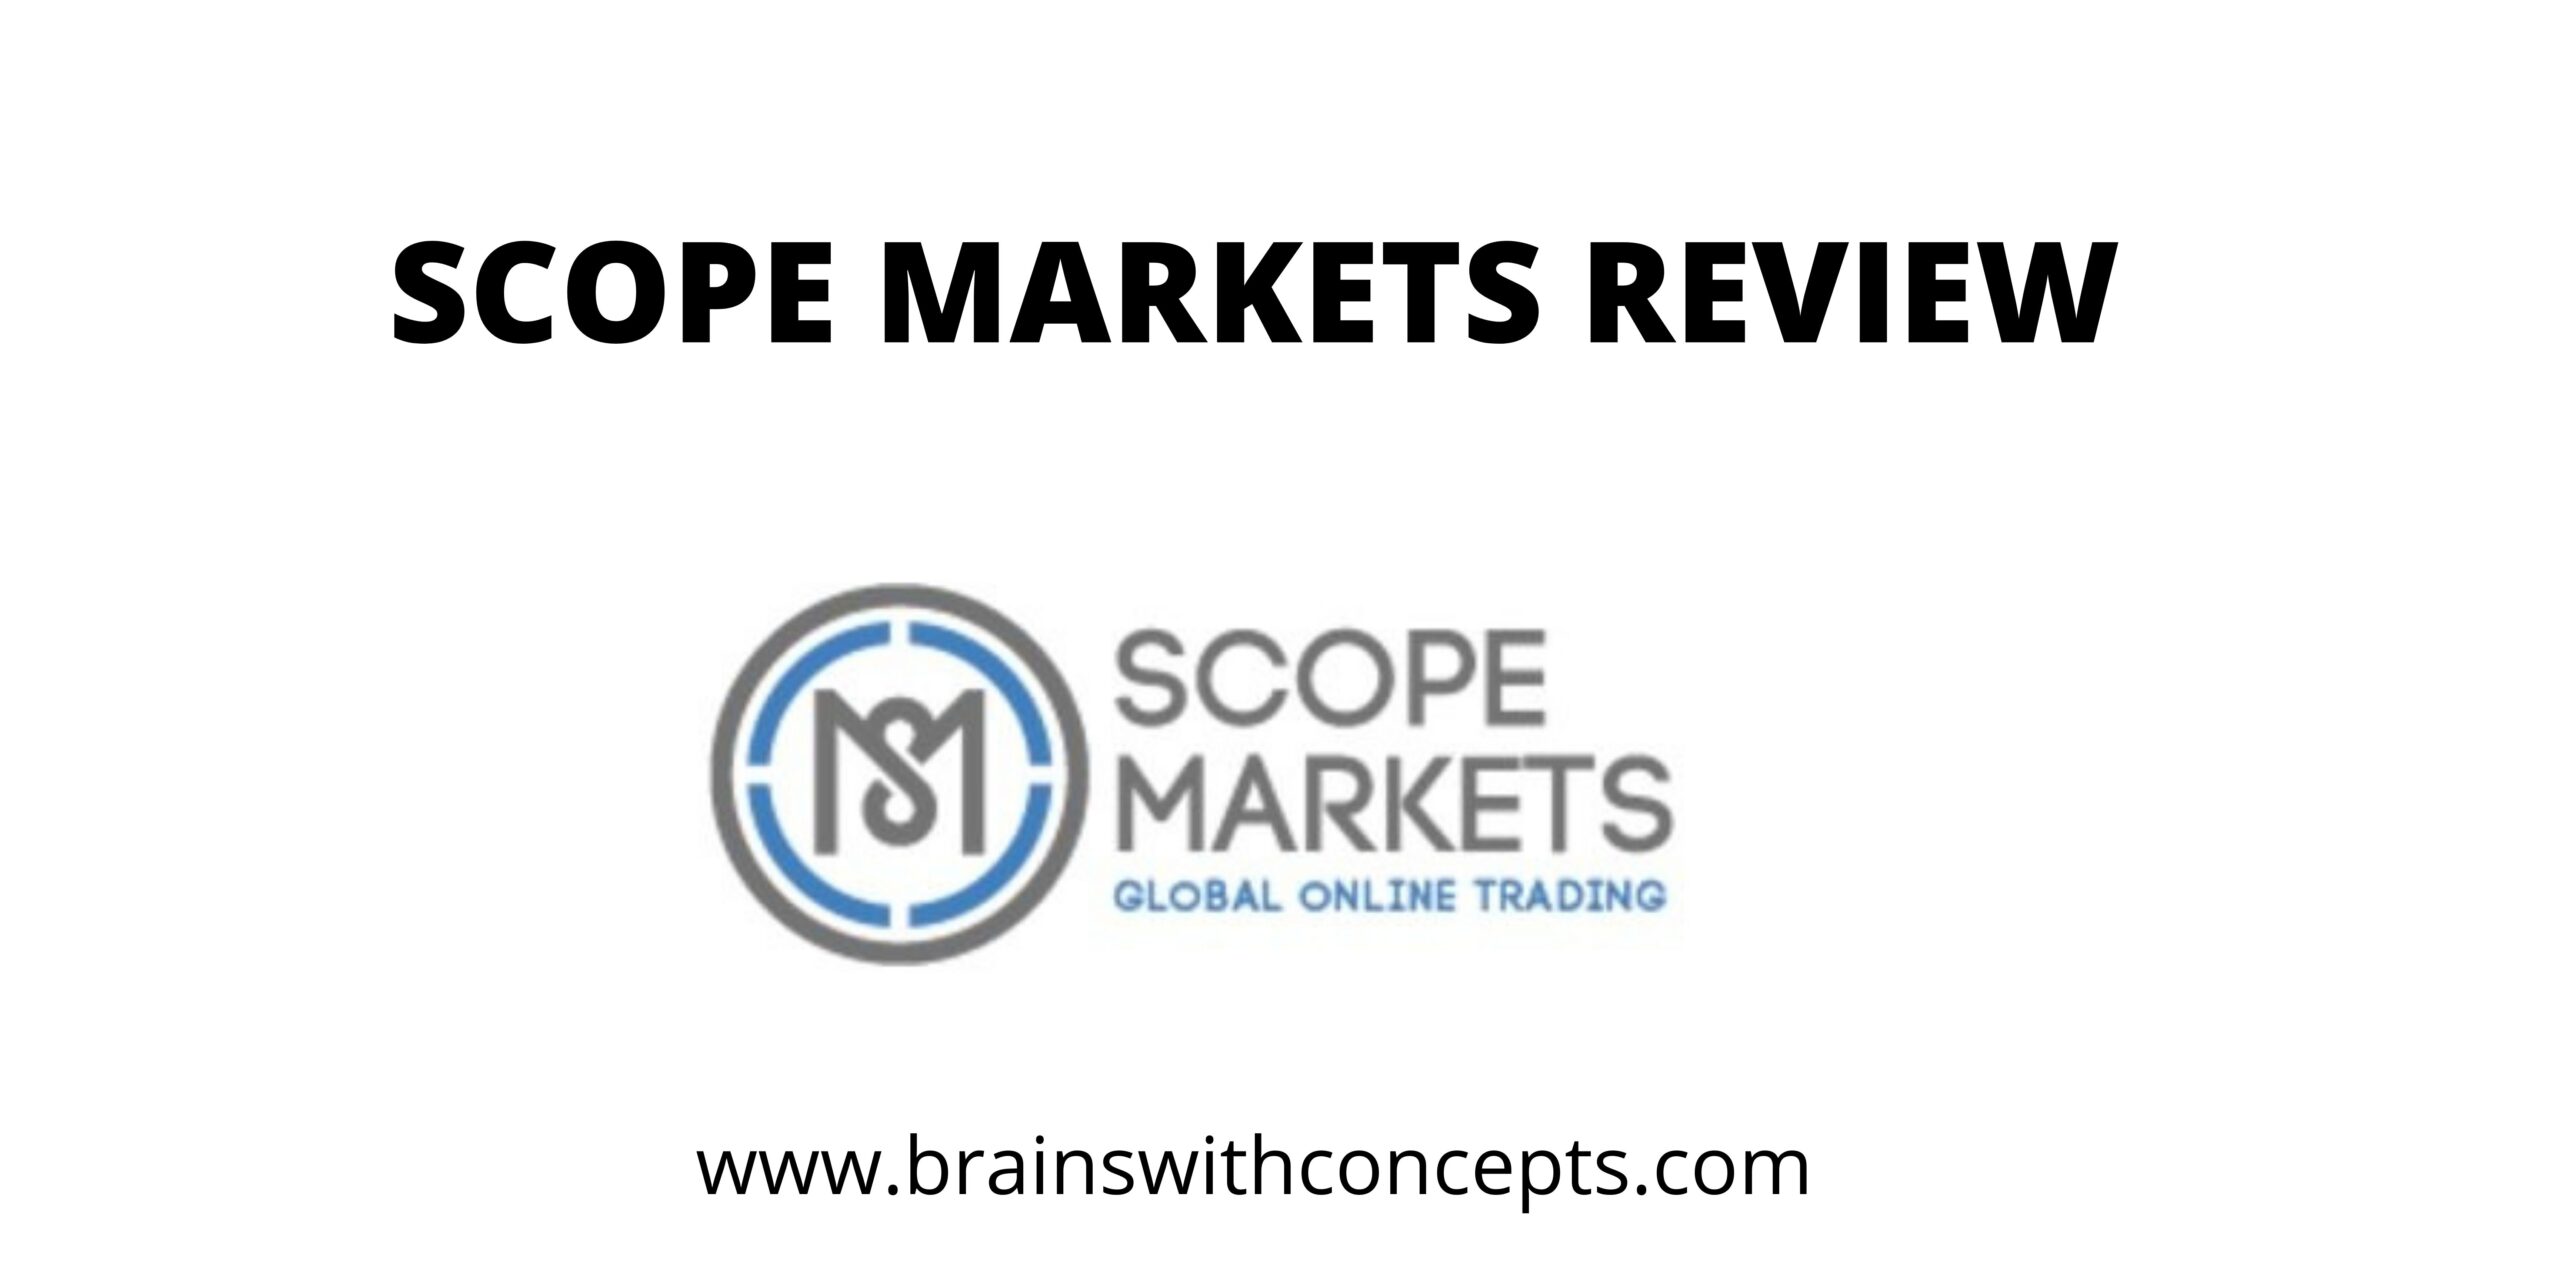 Scope markets review